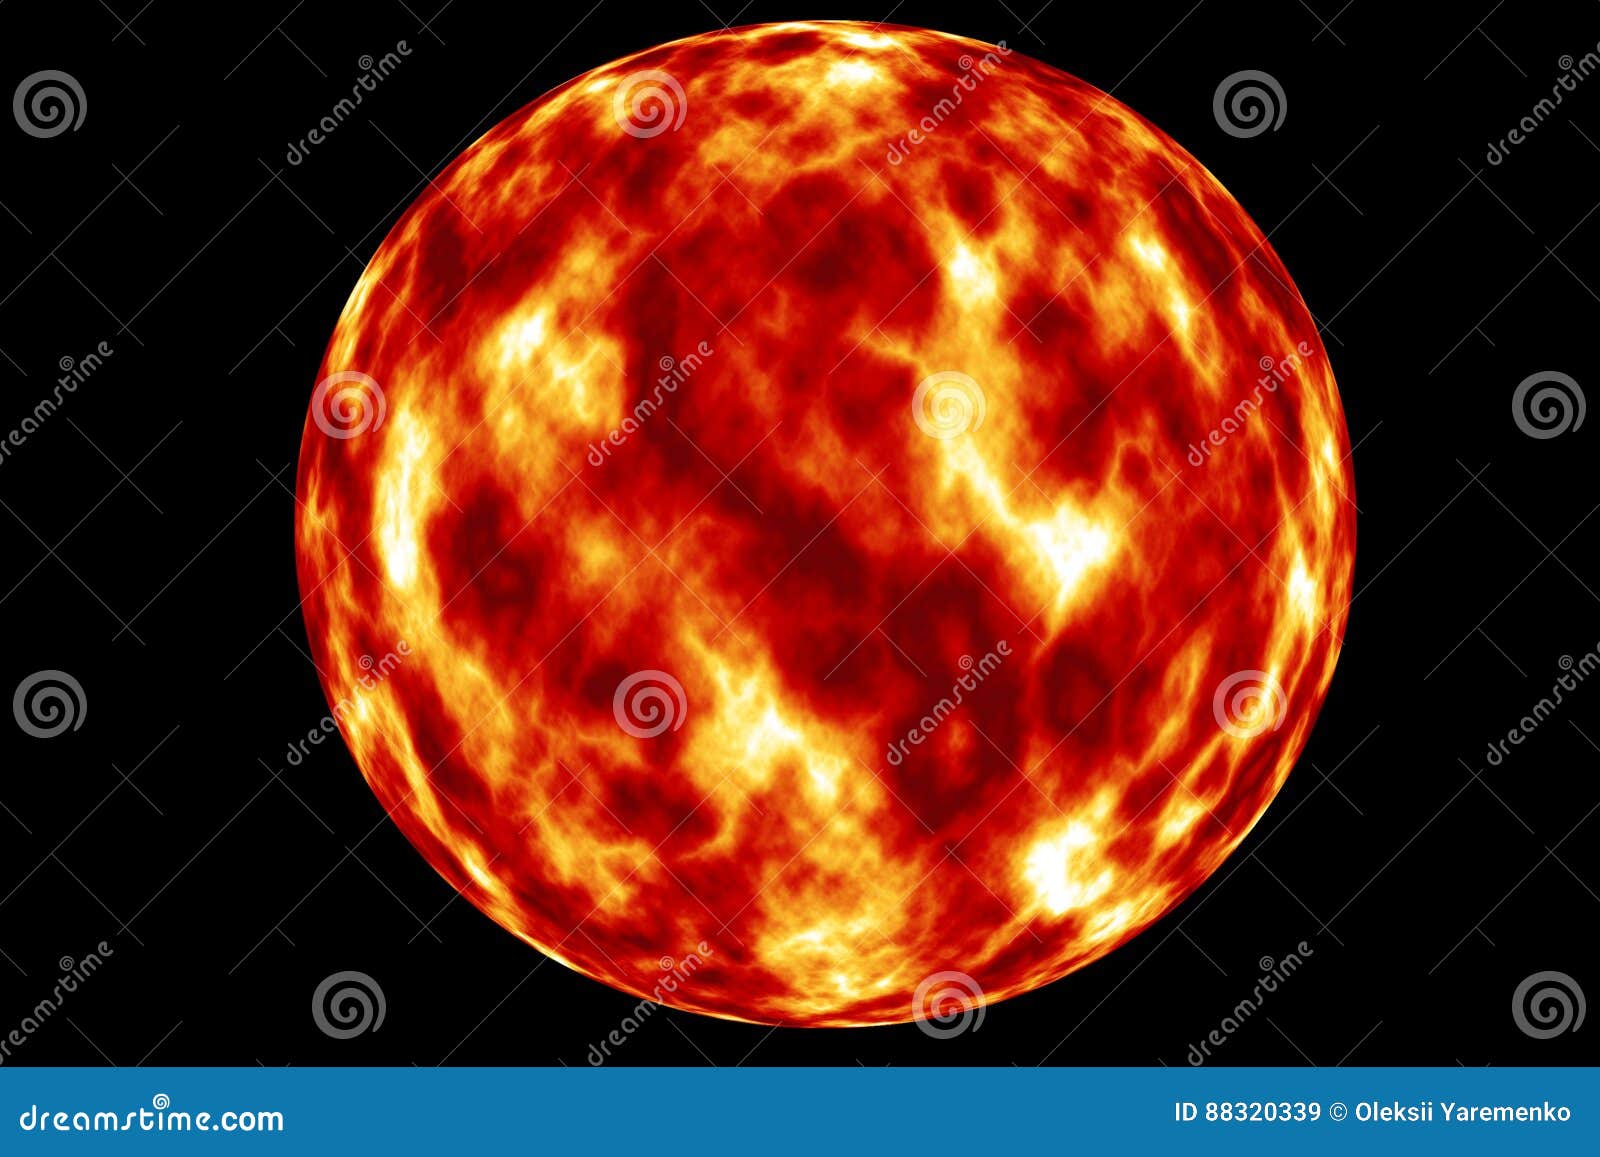 The Sun The Red Giant Stock Illustration Illustration Of